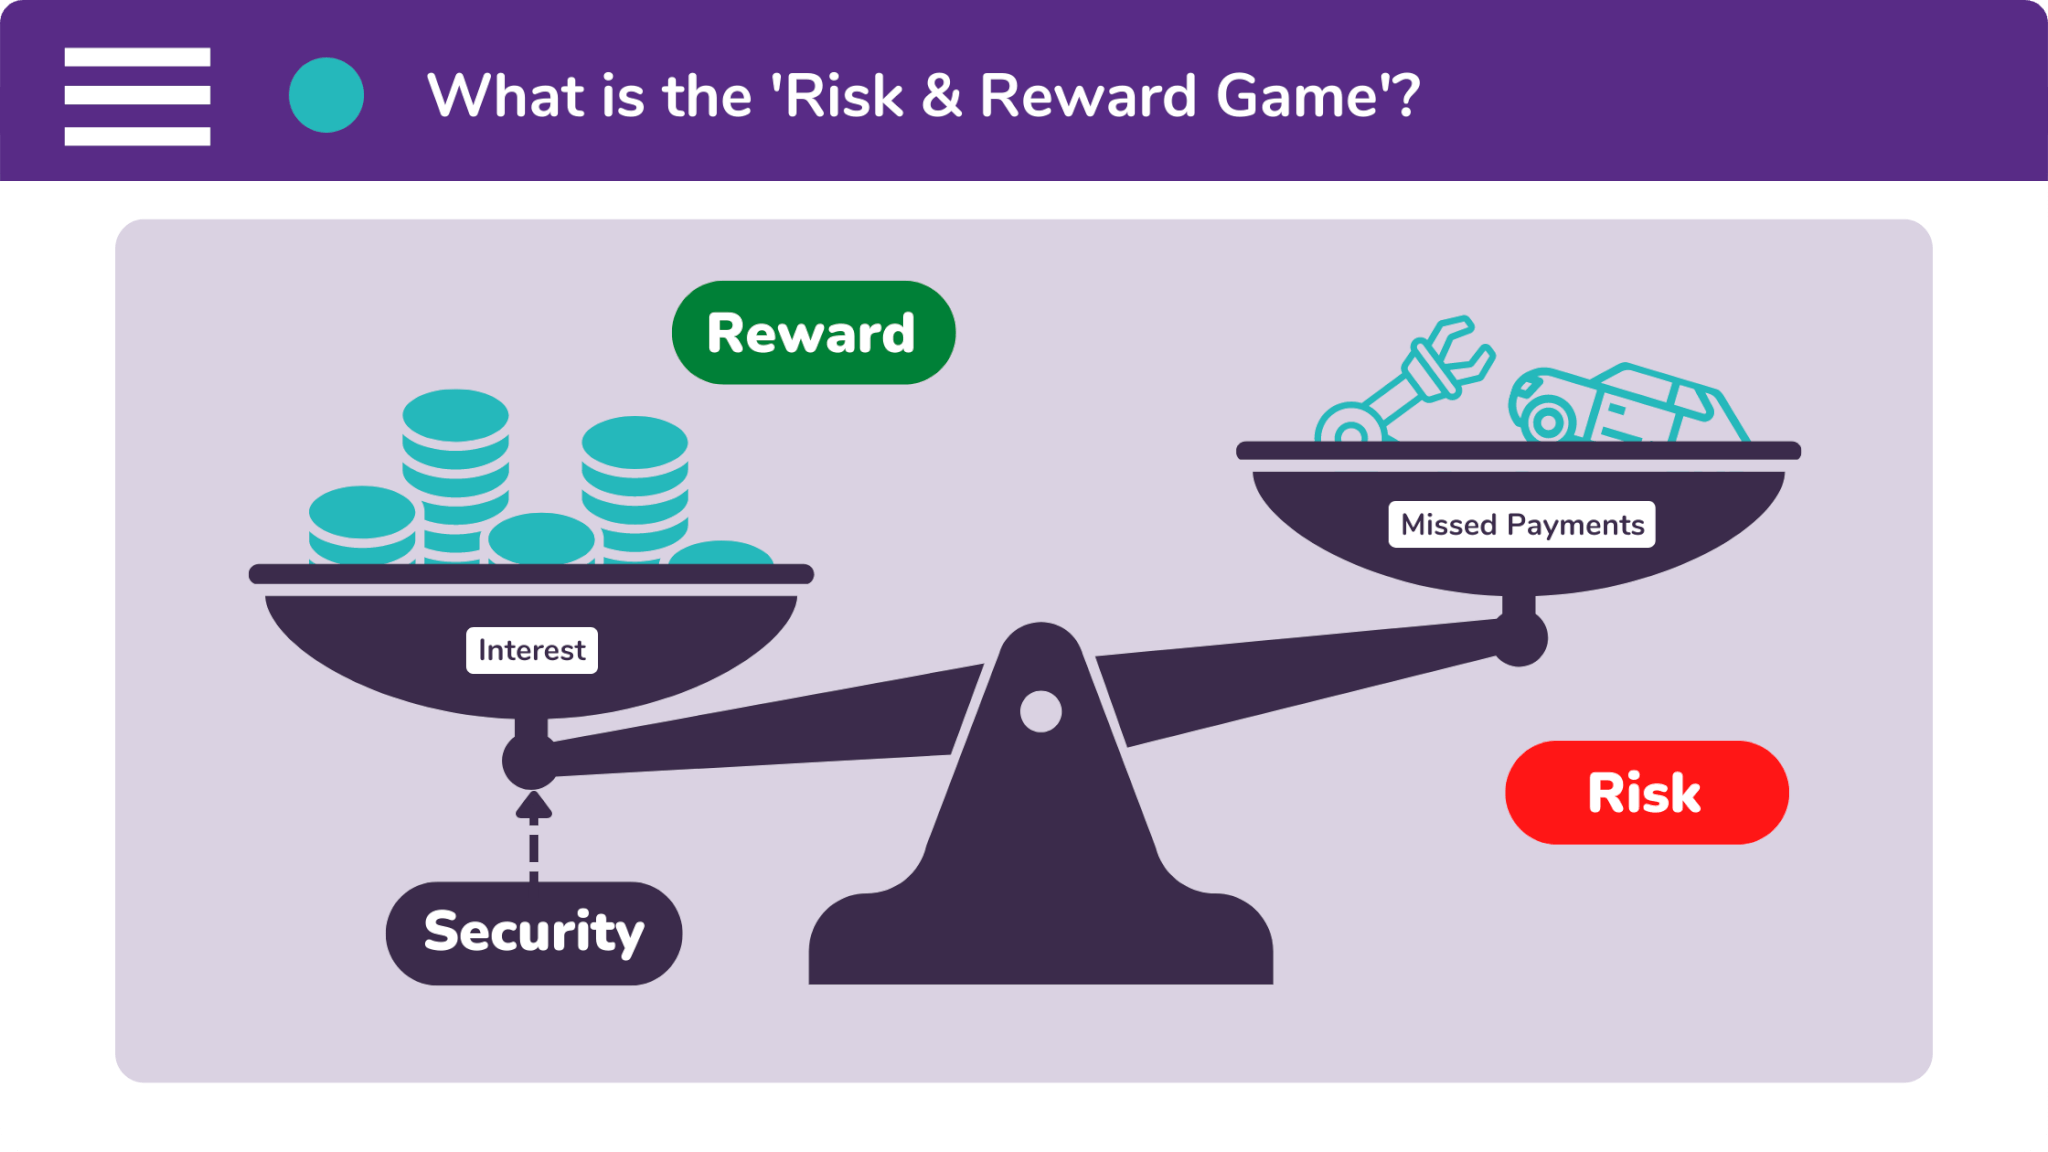 The 'Risk and Reward Game' is something which lenders play to decide whether they're going to lend you money.